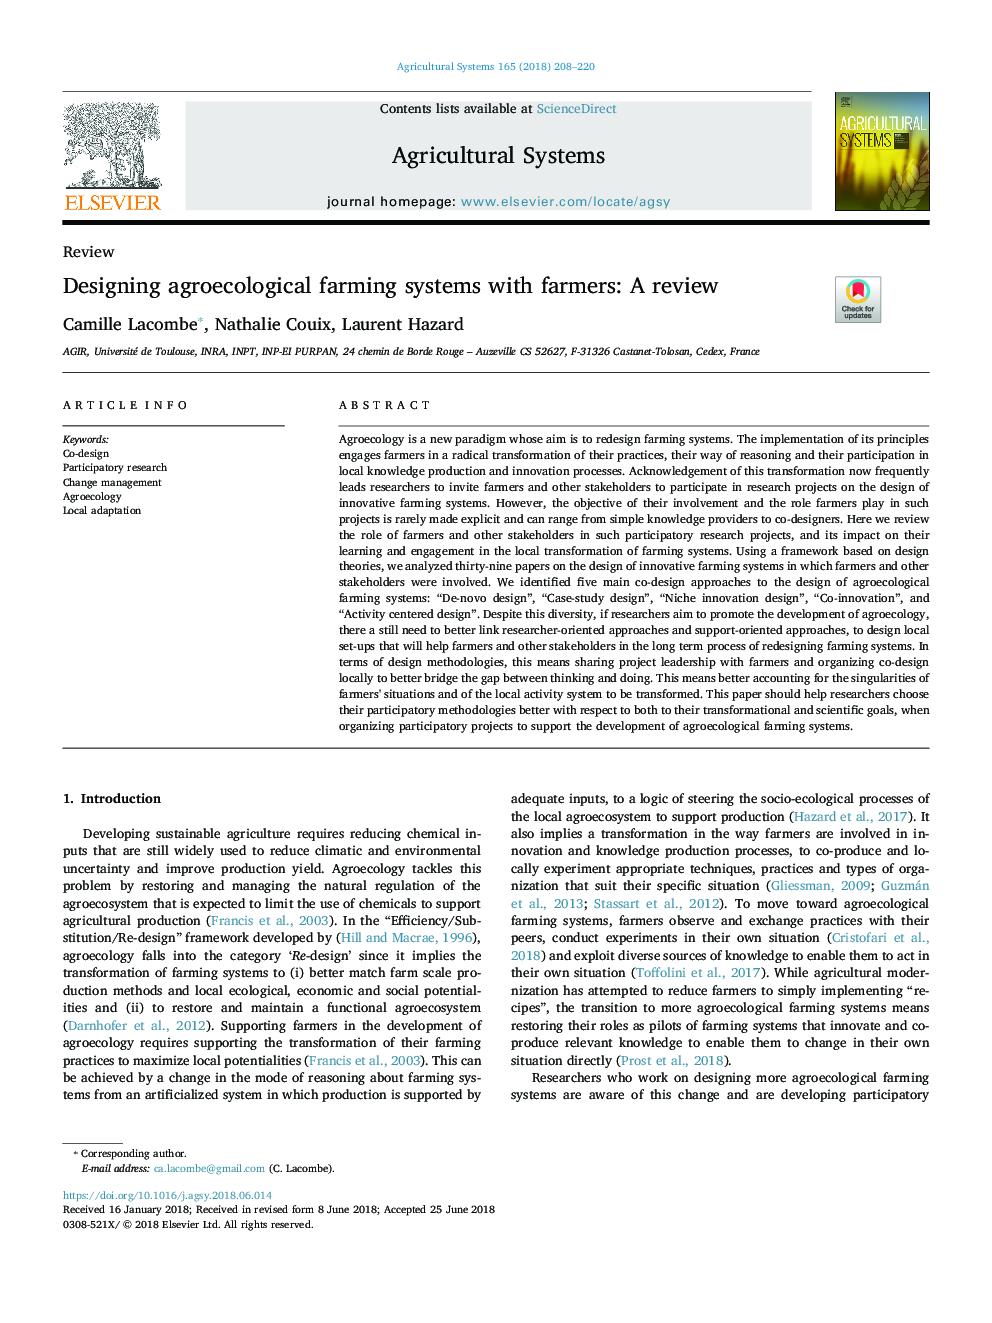 Designing agroecological farming systems with farmers: A review